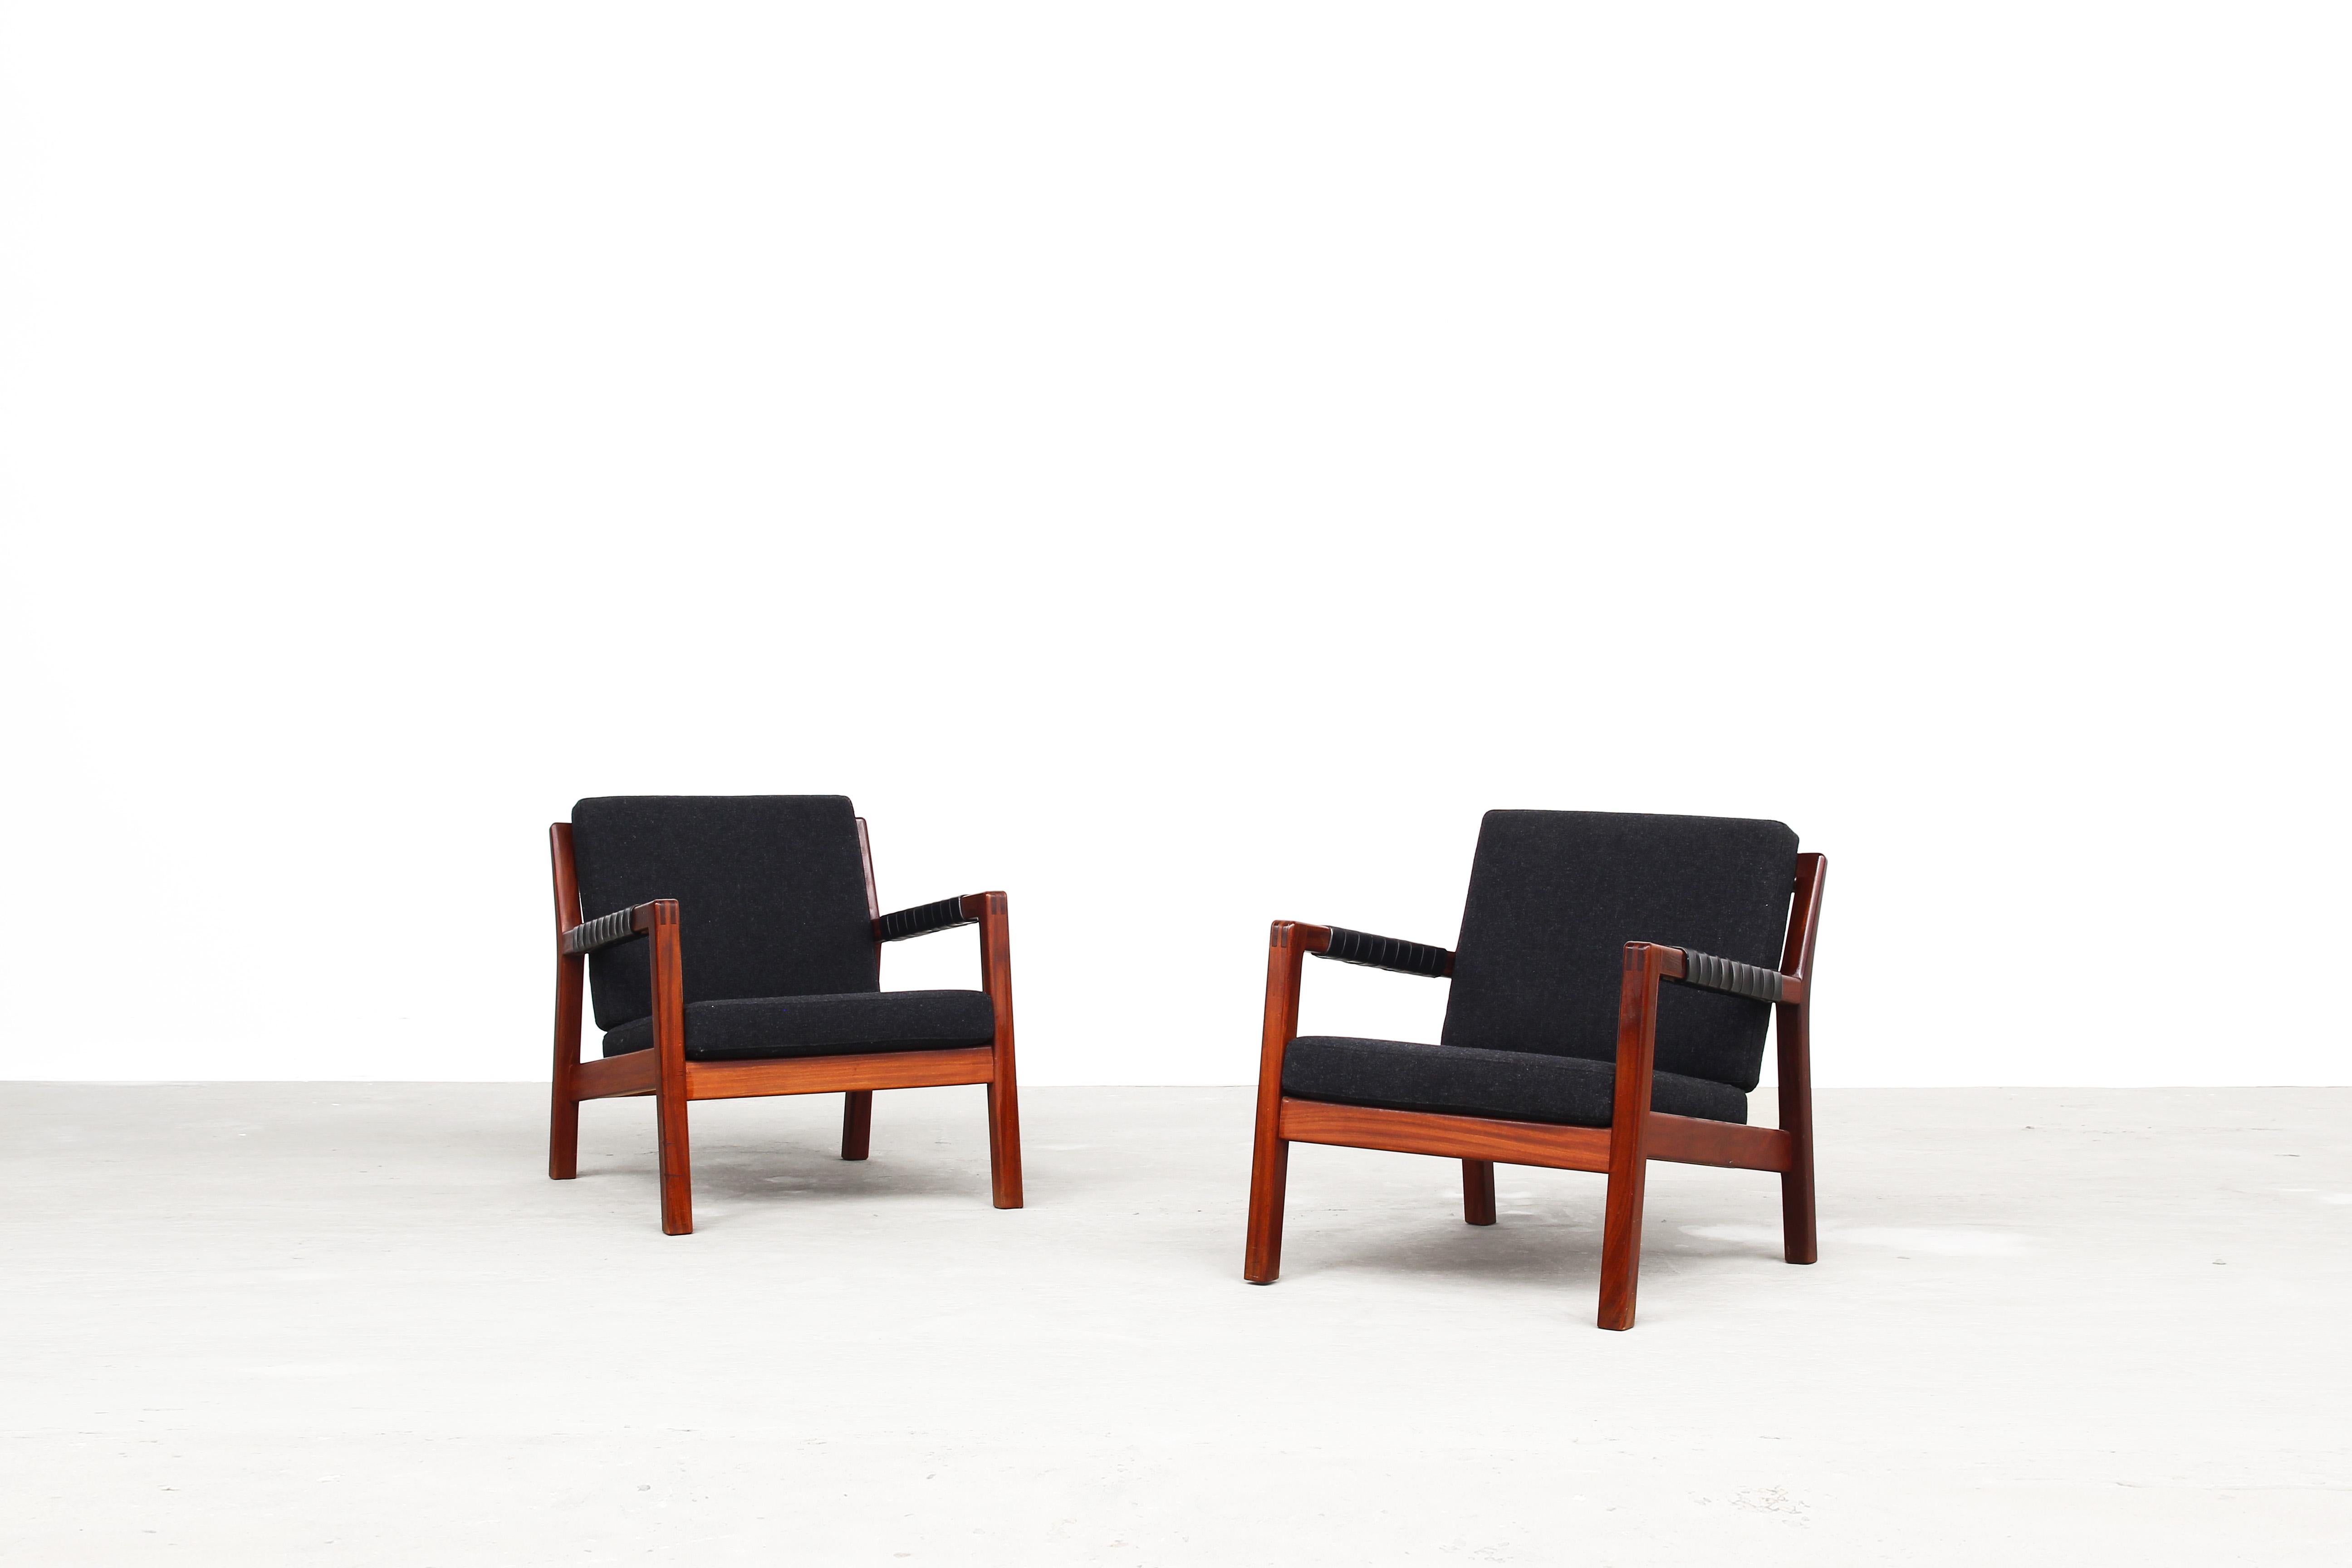 Very beautiful pair of lounge chairs by Carl Gustaf Hiort af Örnas, manufactured in Finland in the 1960s.
Both chairs are in a very good condition, the leather mesh is still in a very good condition and the cushions were newly reupholstered with a